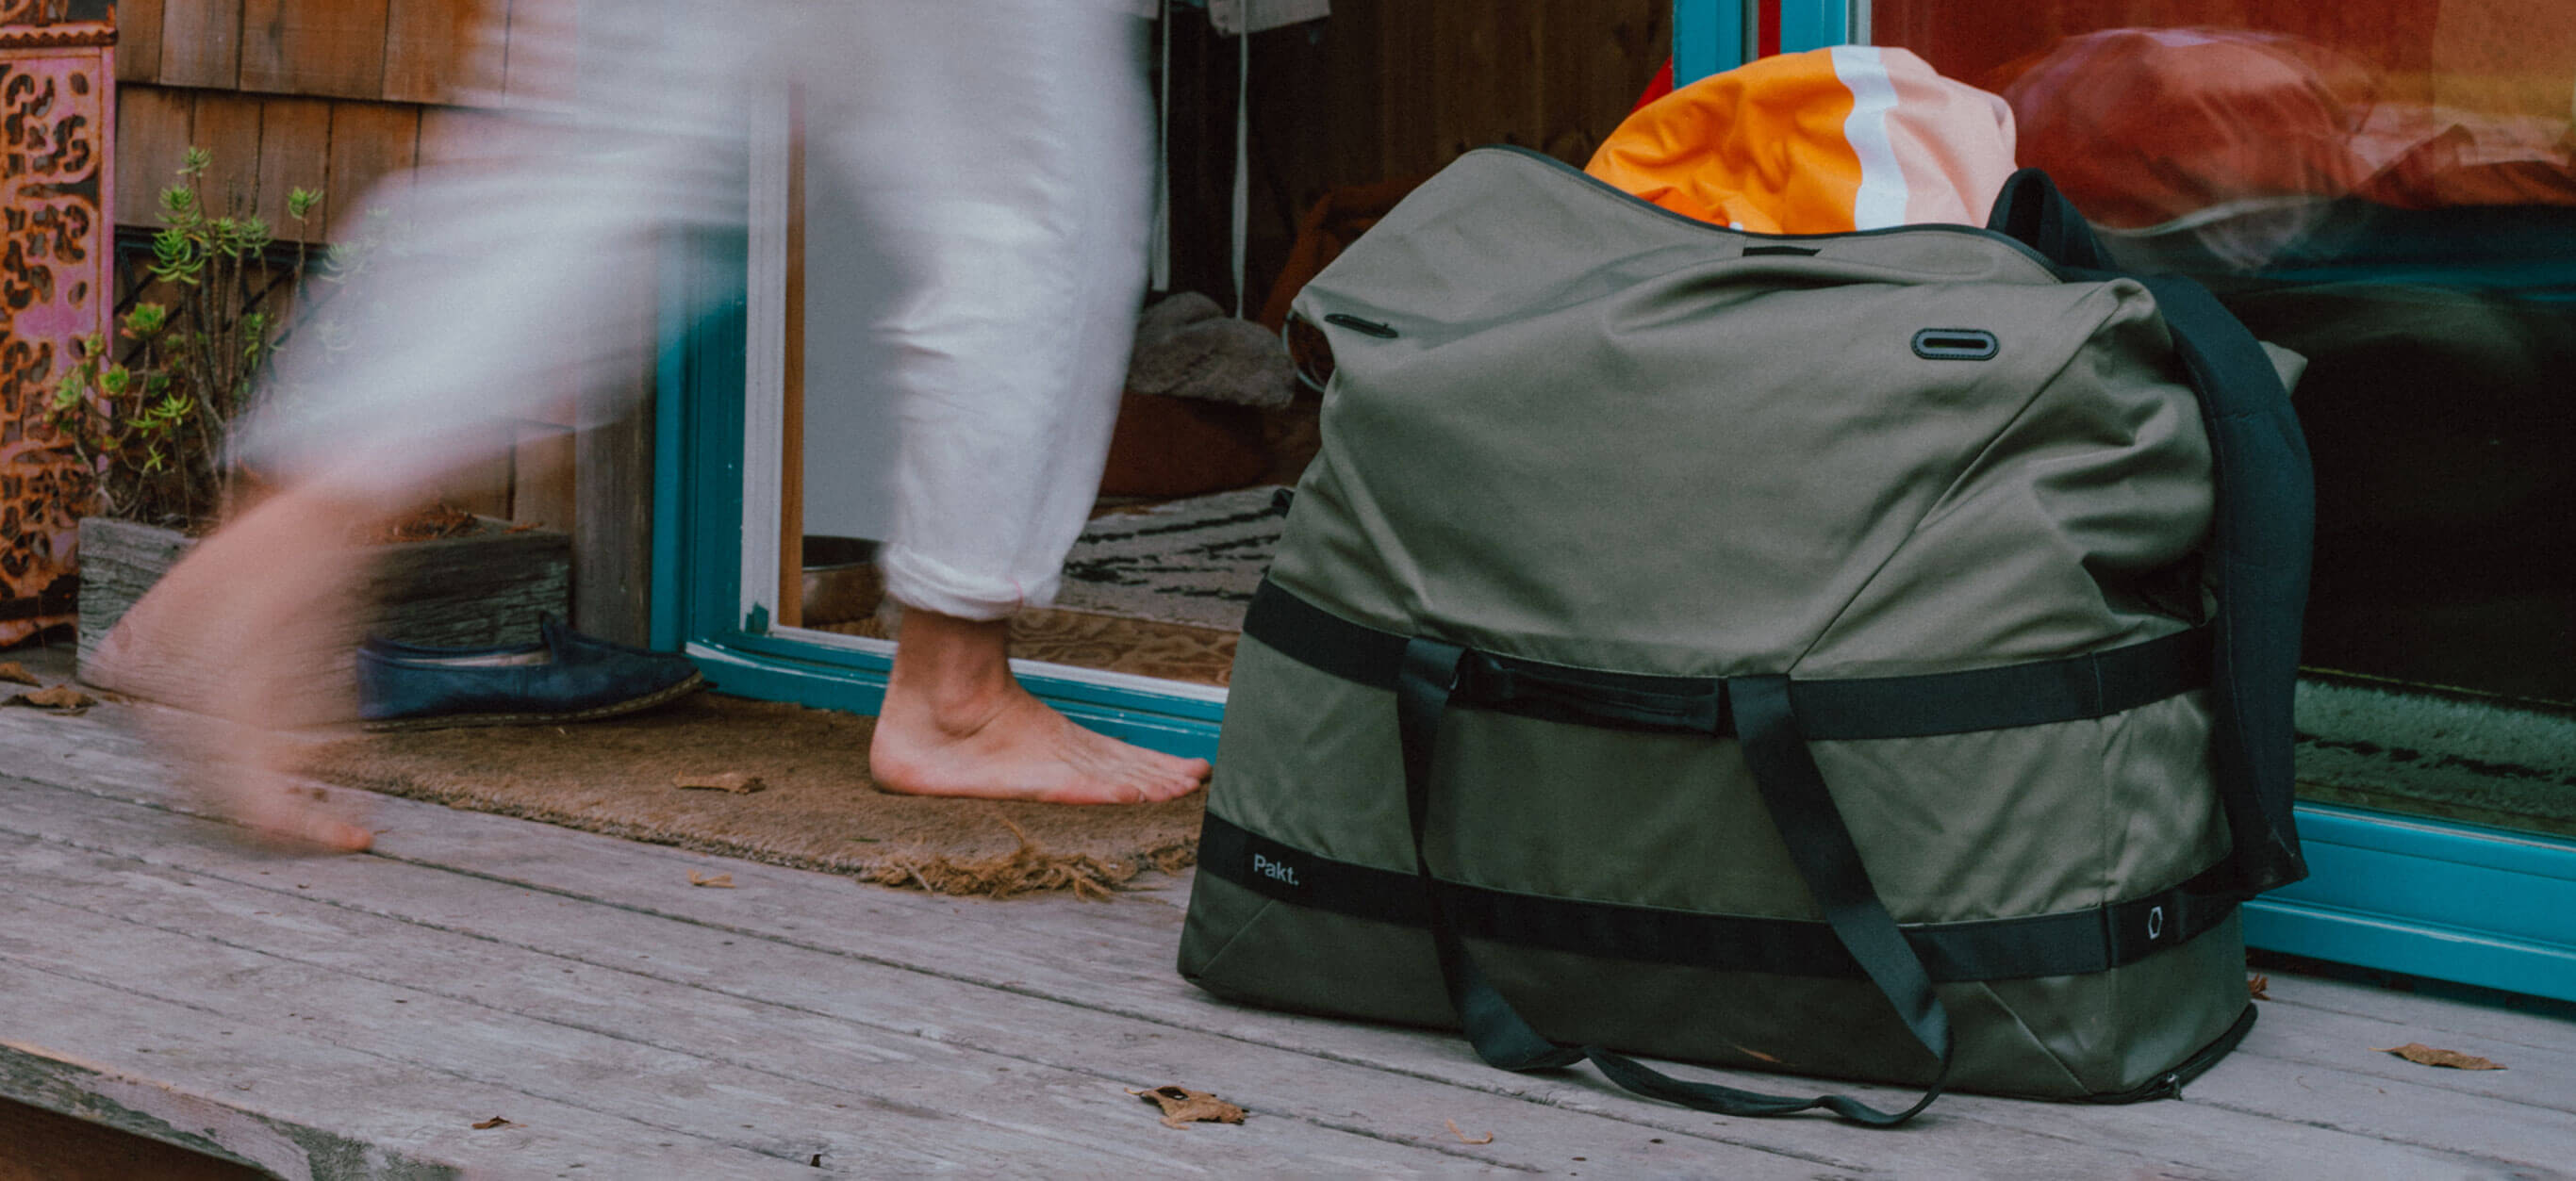 The Gear Hauler expands into a 120L zippered tote